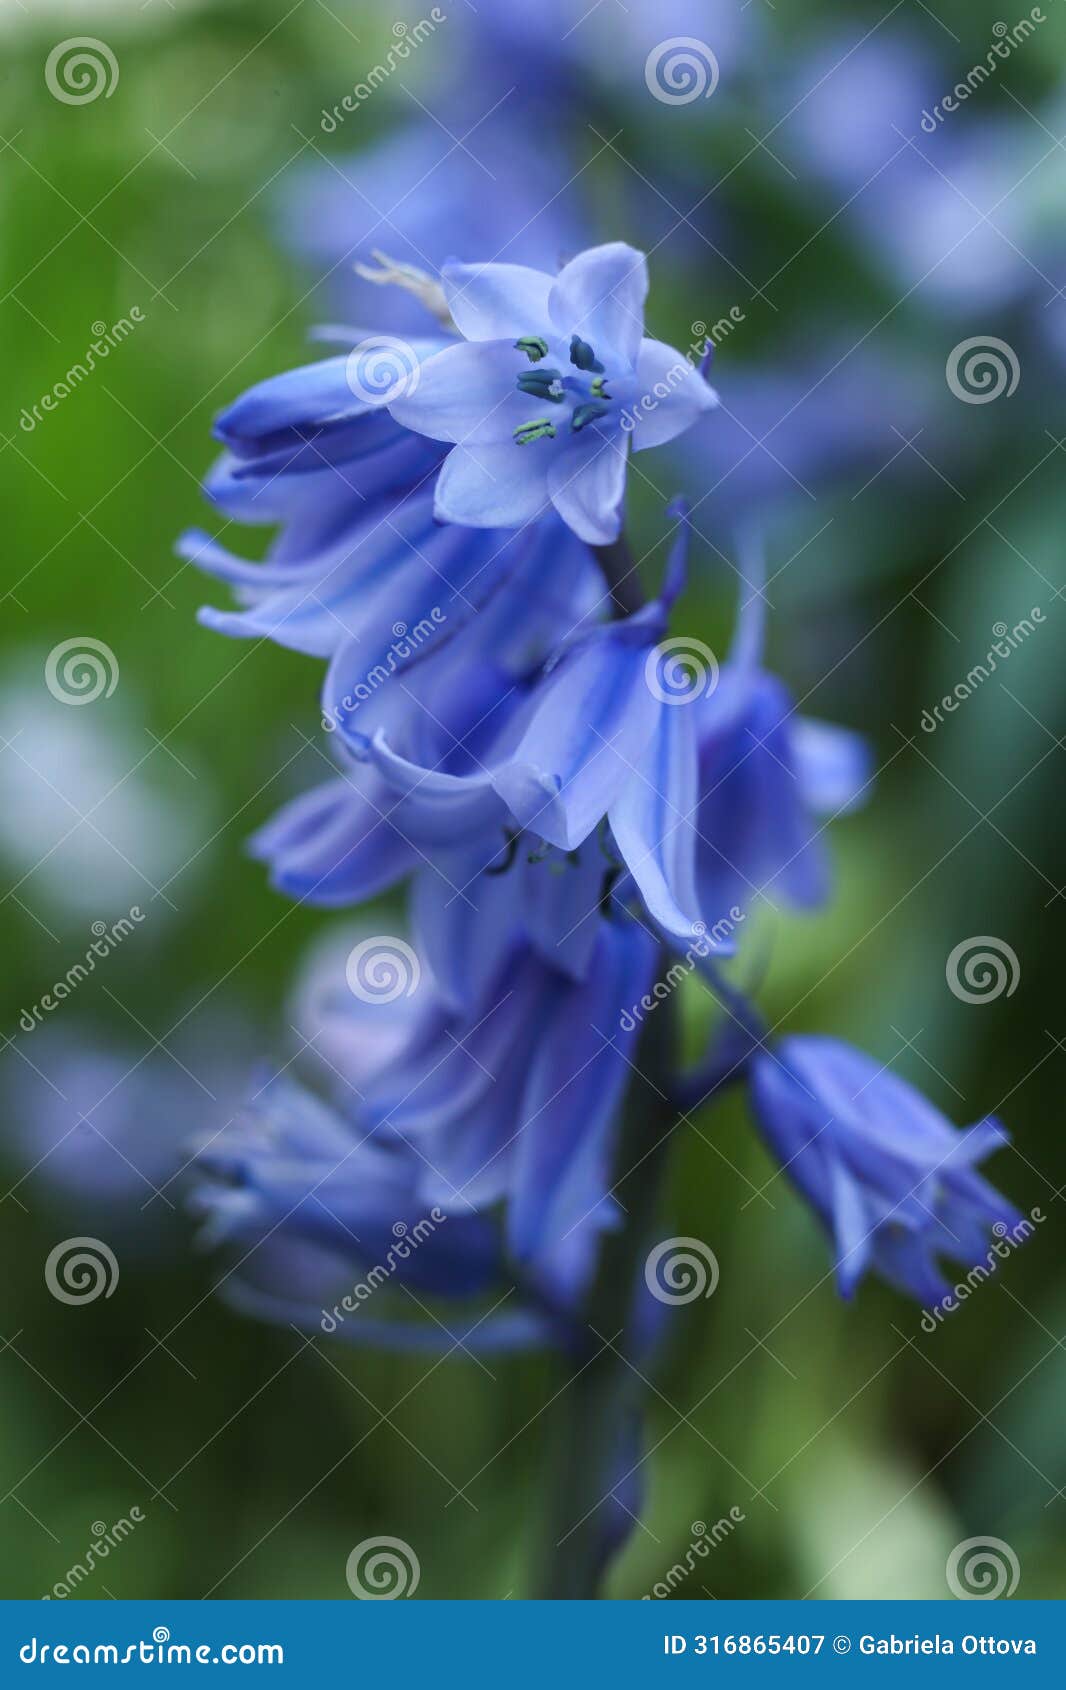 hyacinthoides hispanica, the spanish bluebell or wood hyacinth flower in the spring garden